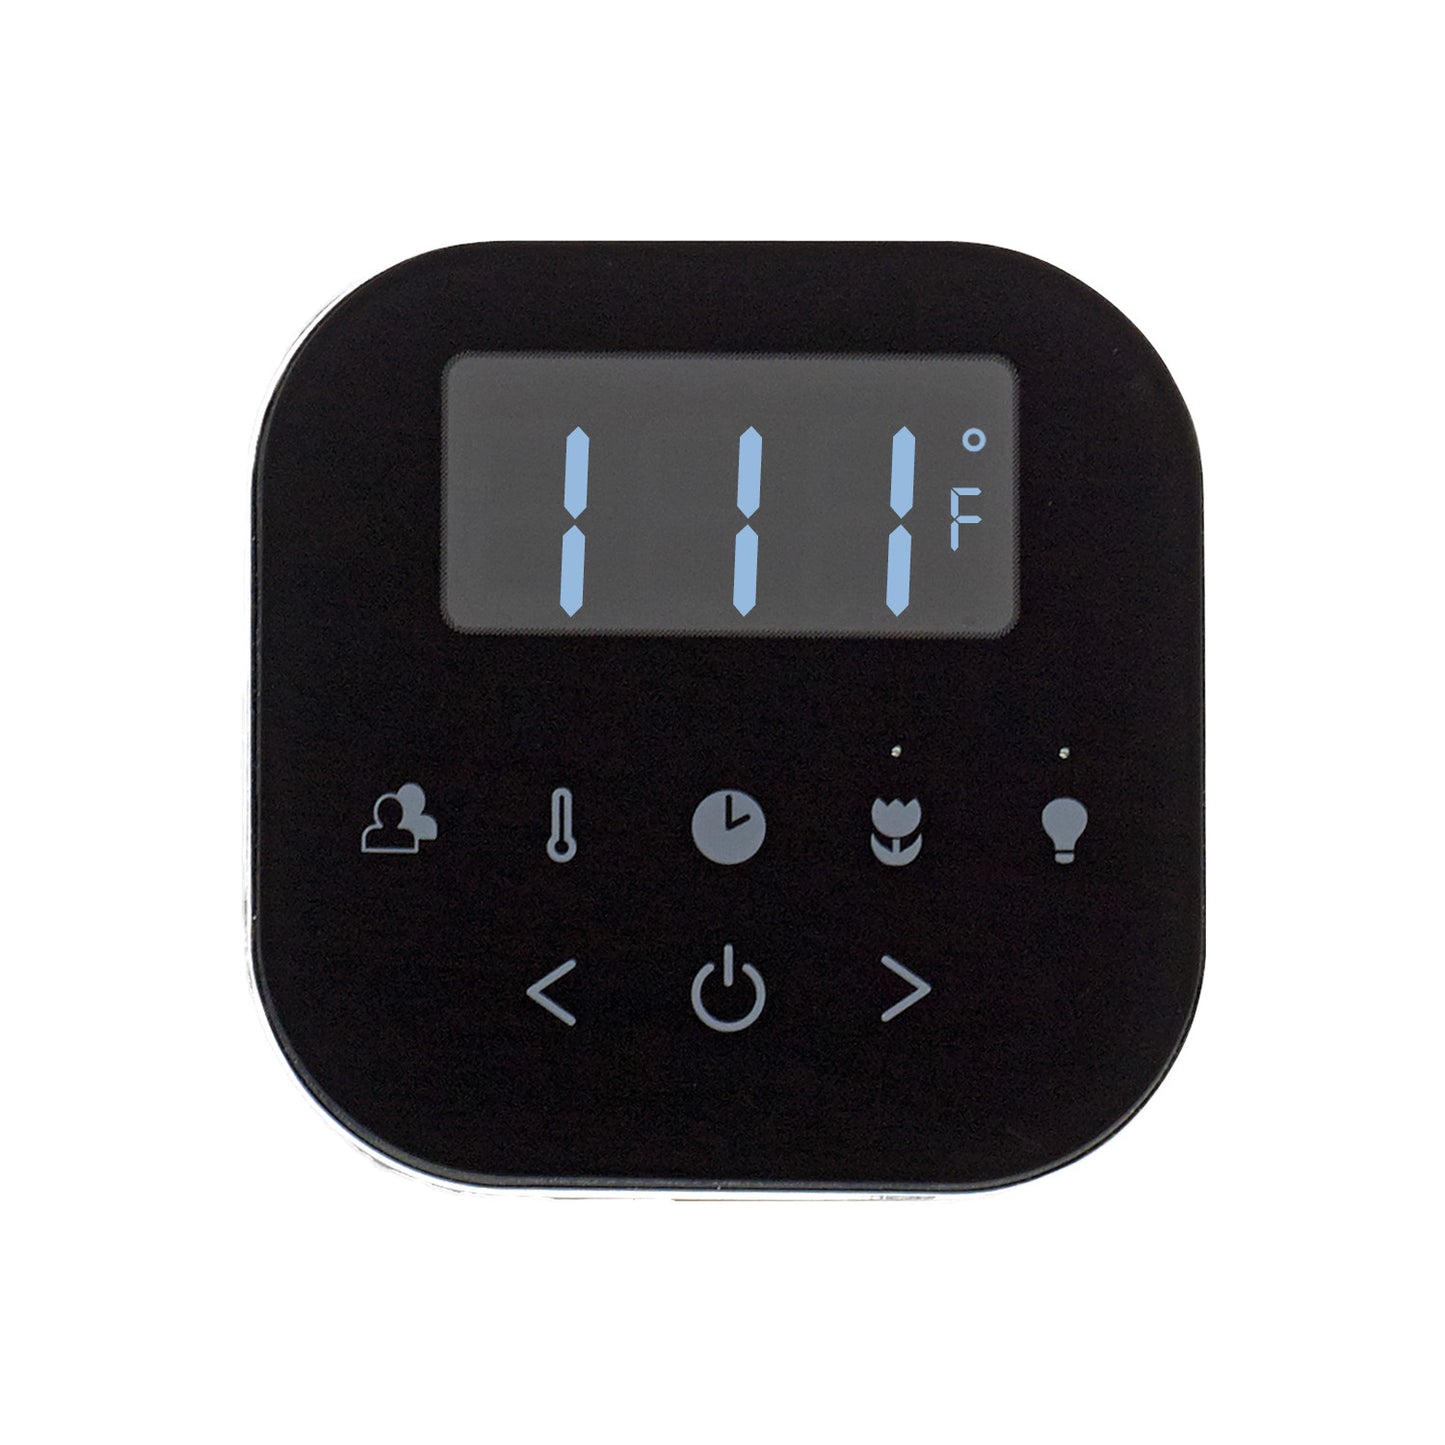 AirTempo Steam Shower Control in Black with Polished Chrome